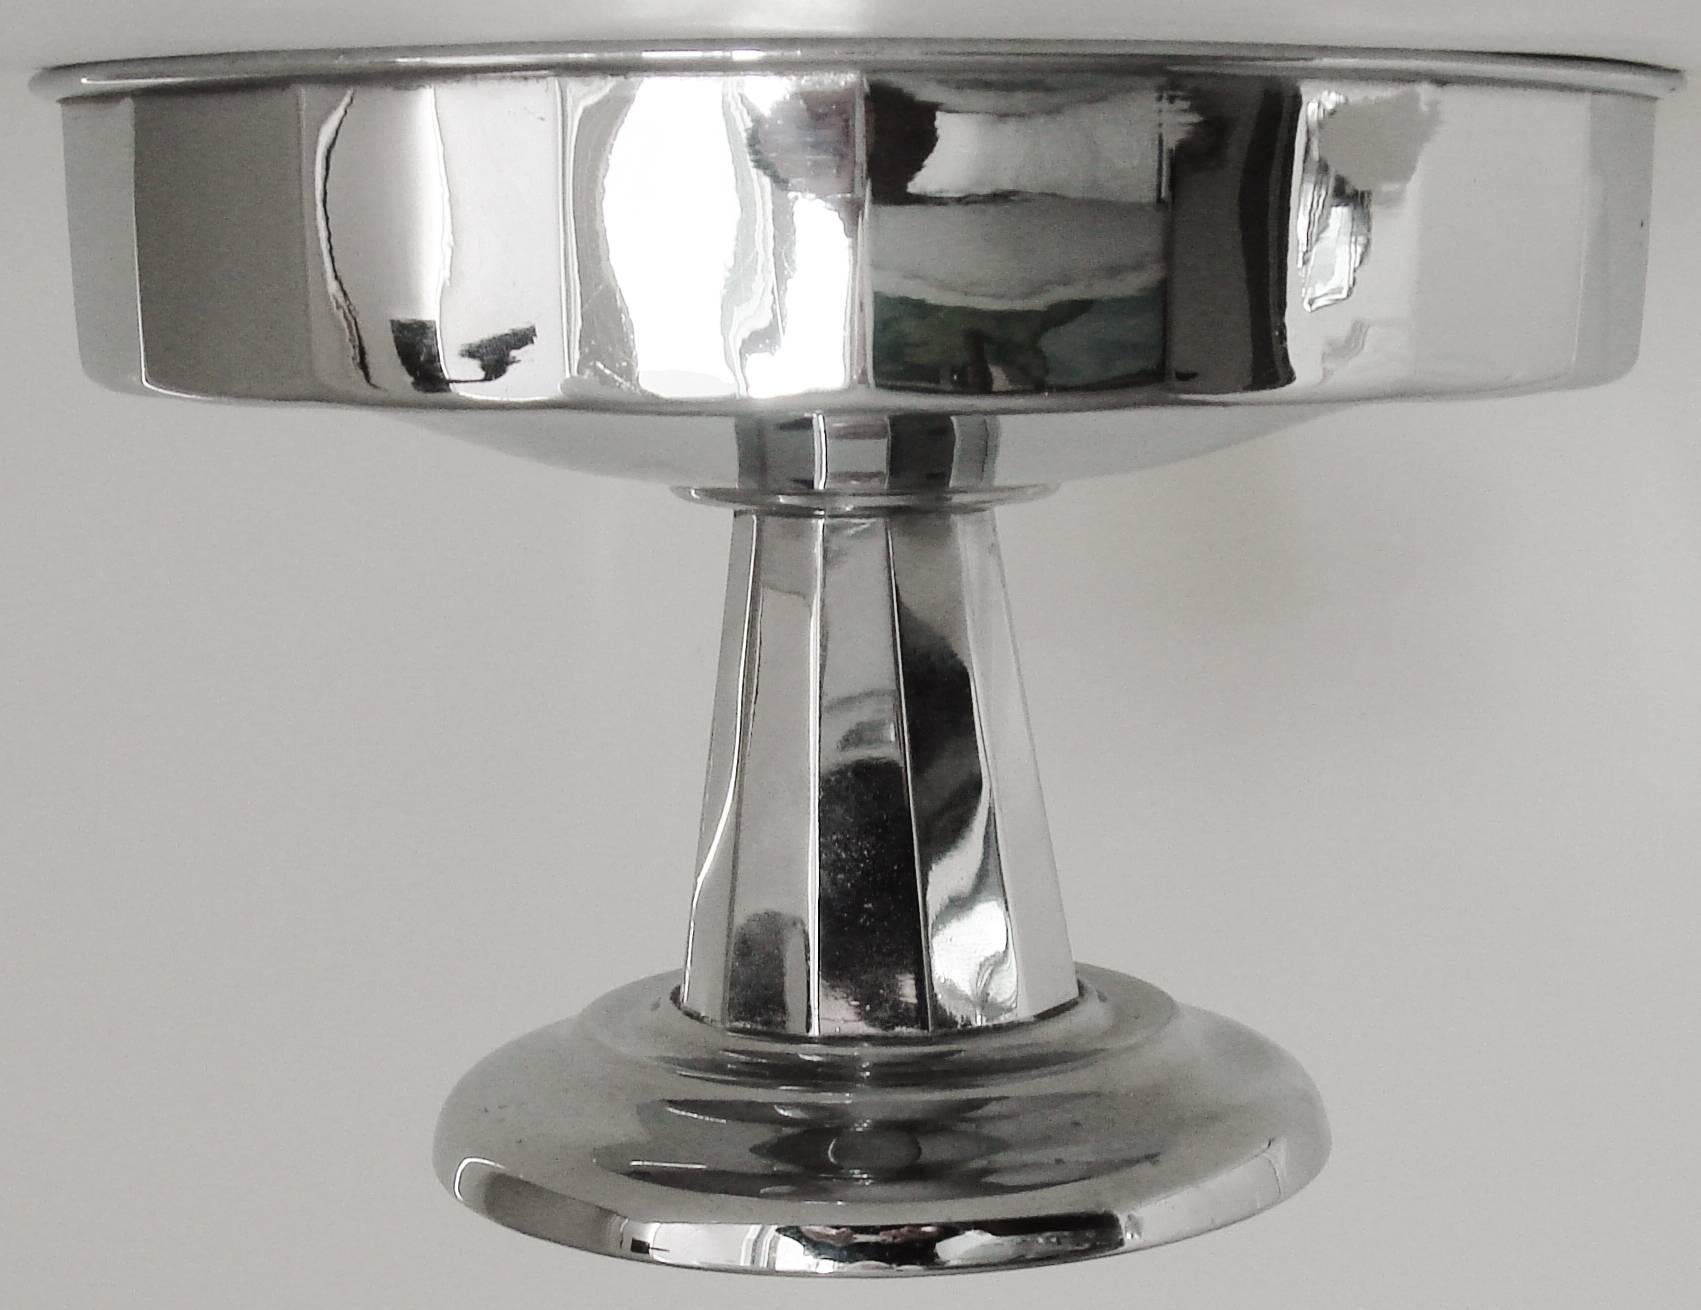 Plated English Art Deco 5-Piece Cocktail Vases, Candlesticks & Compote Console Set.